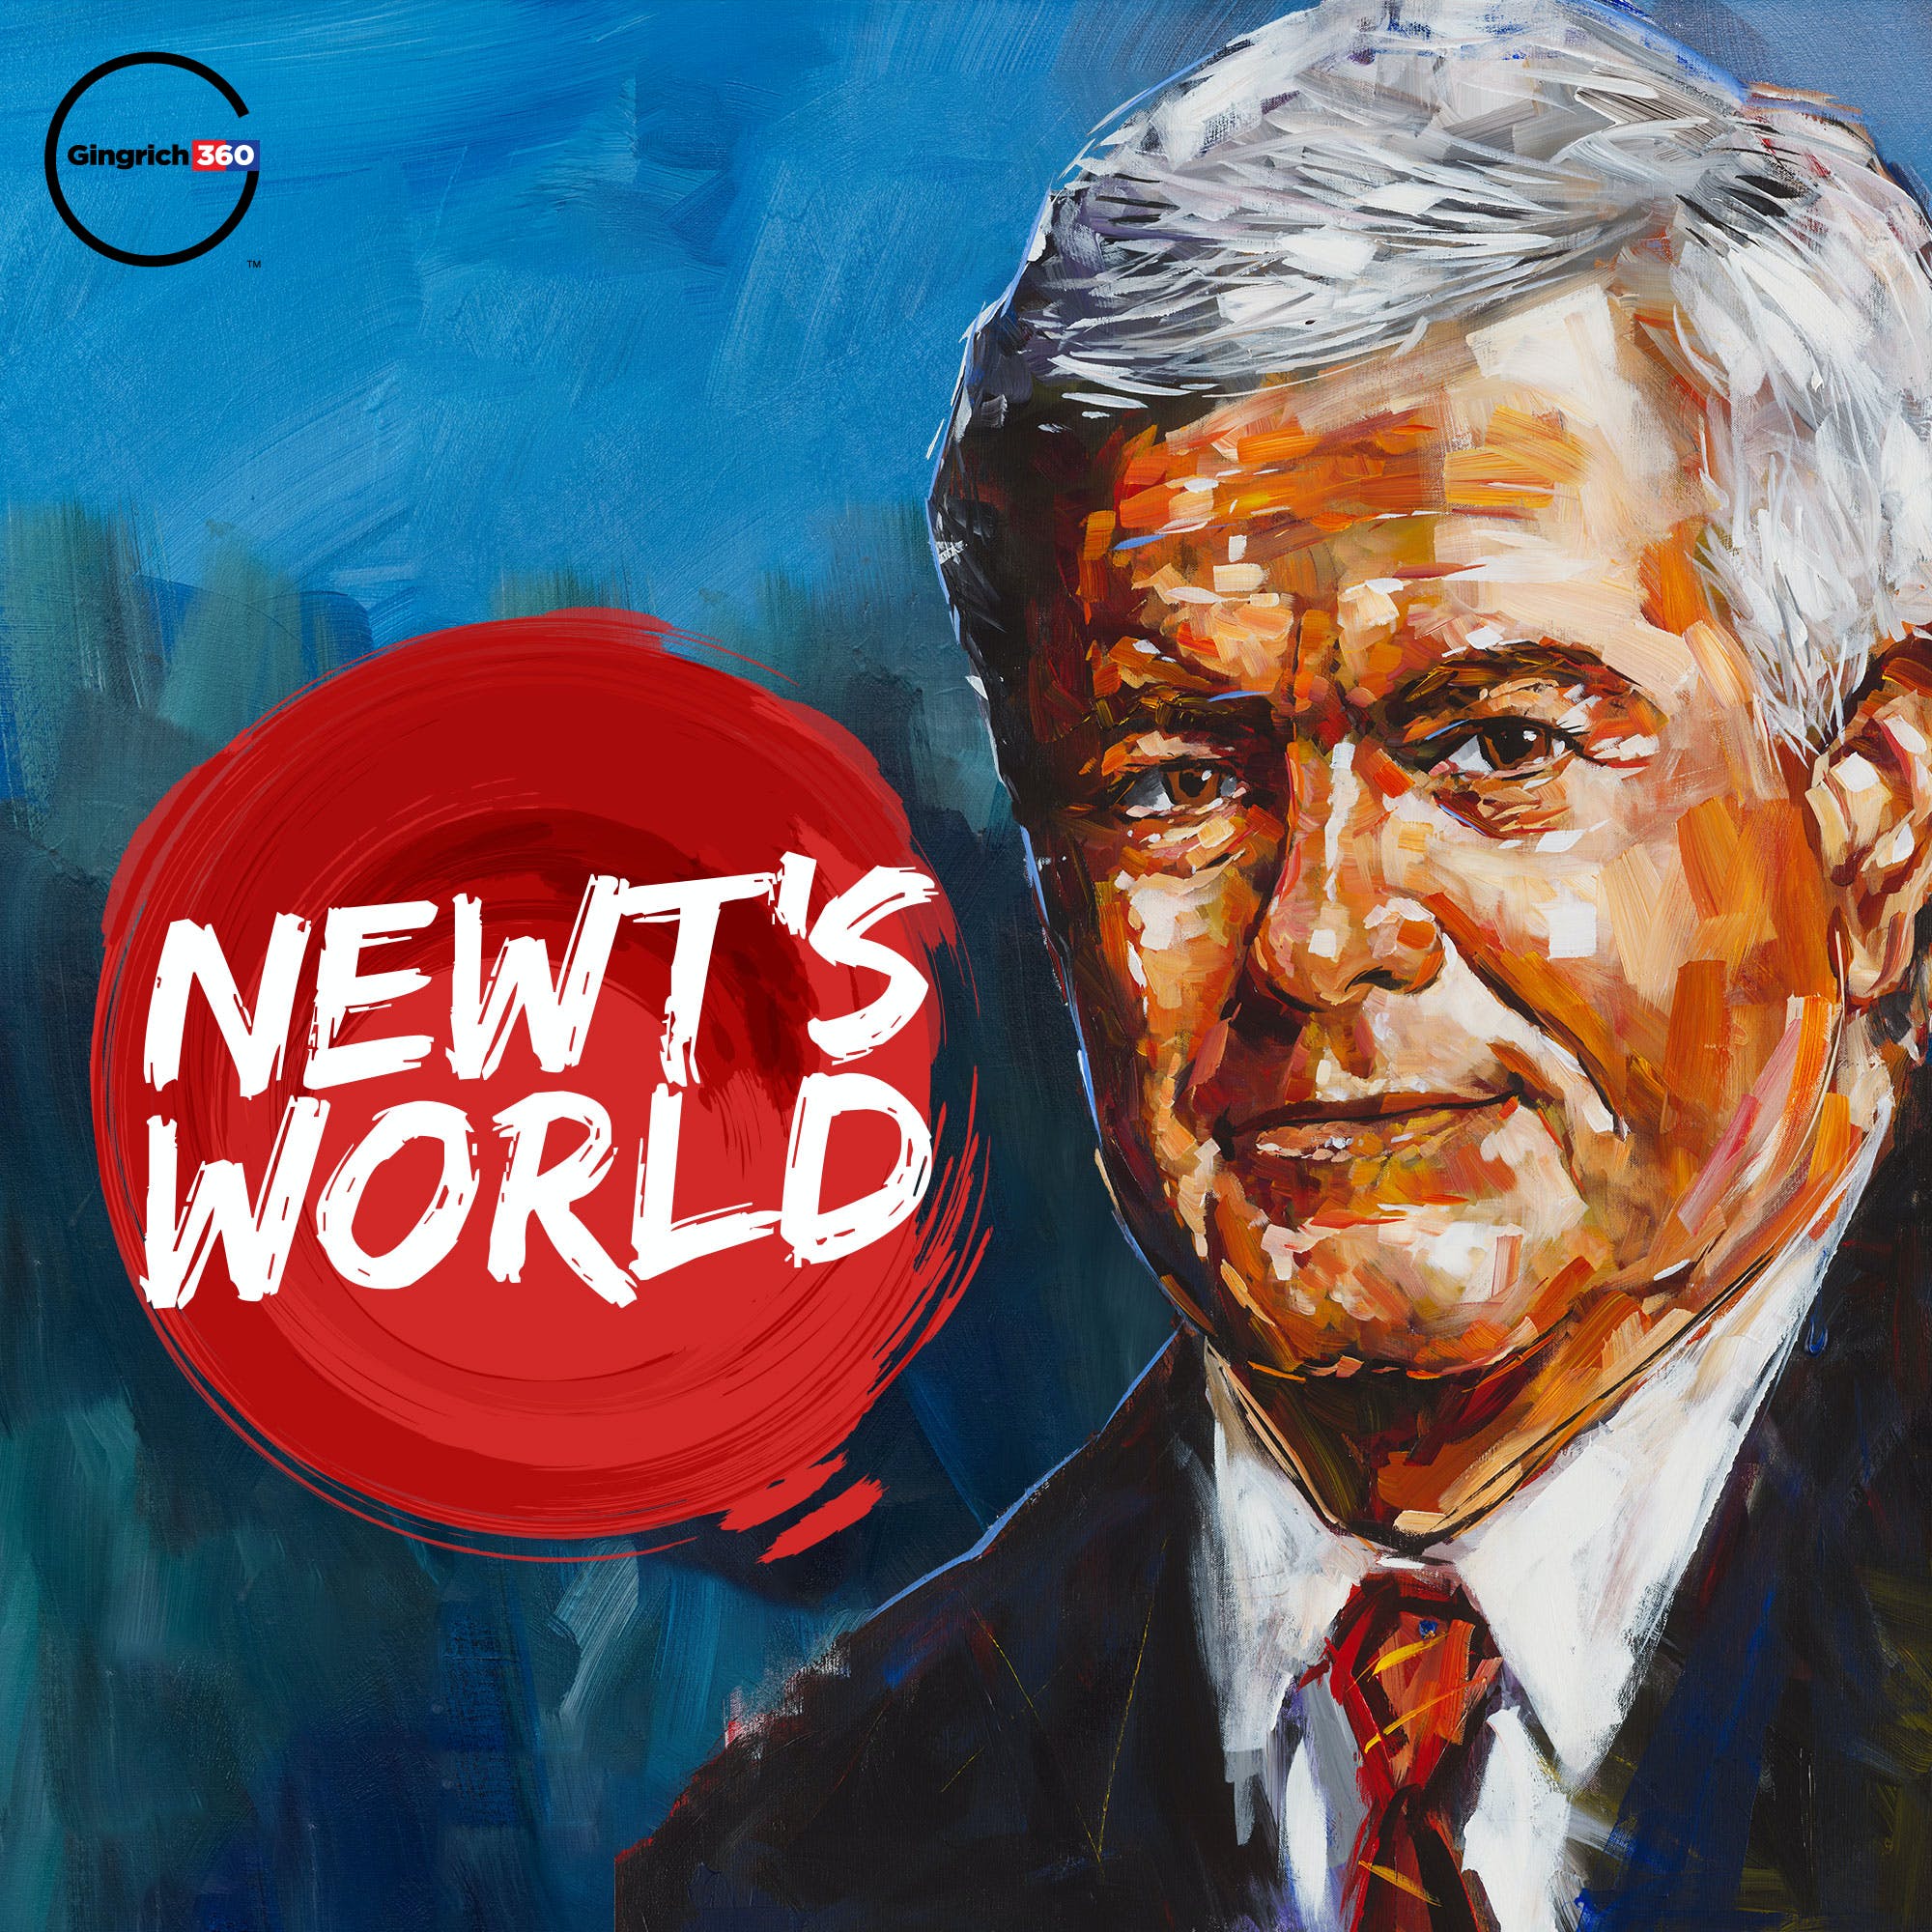 Episode 594: The Best of Newt's World - Governor Kristi Noem on Lesson’s from a Rancher’s Life